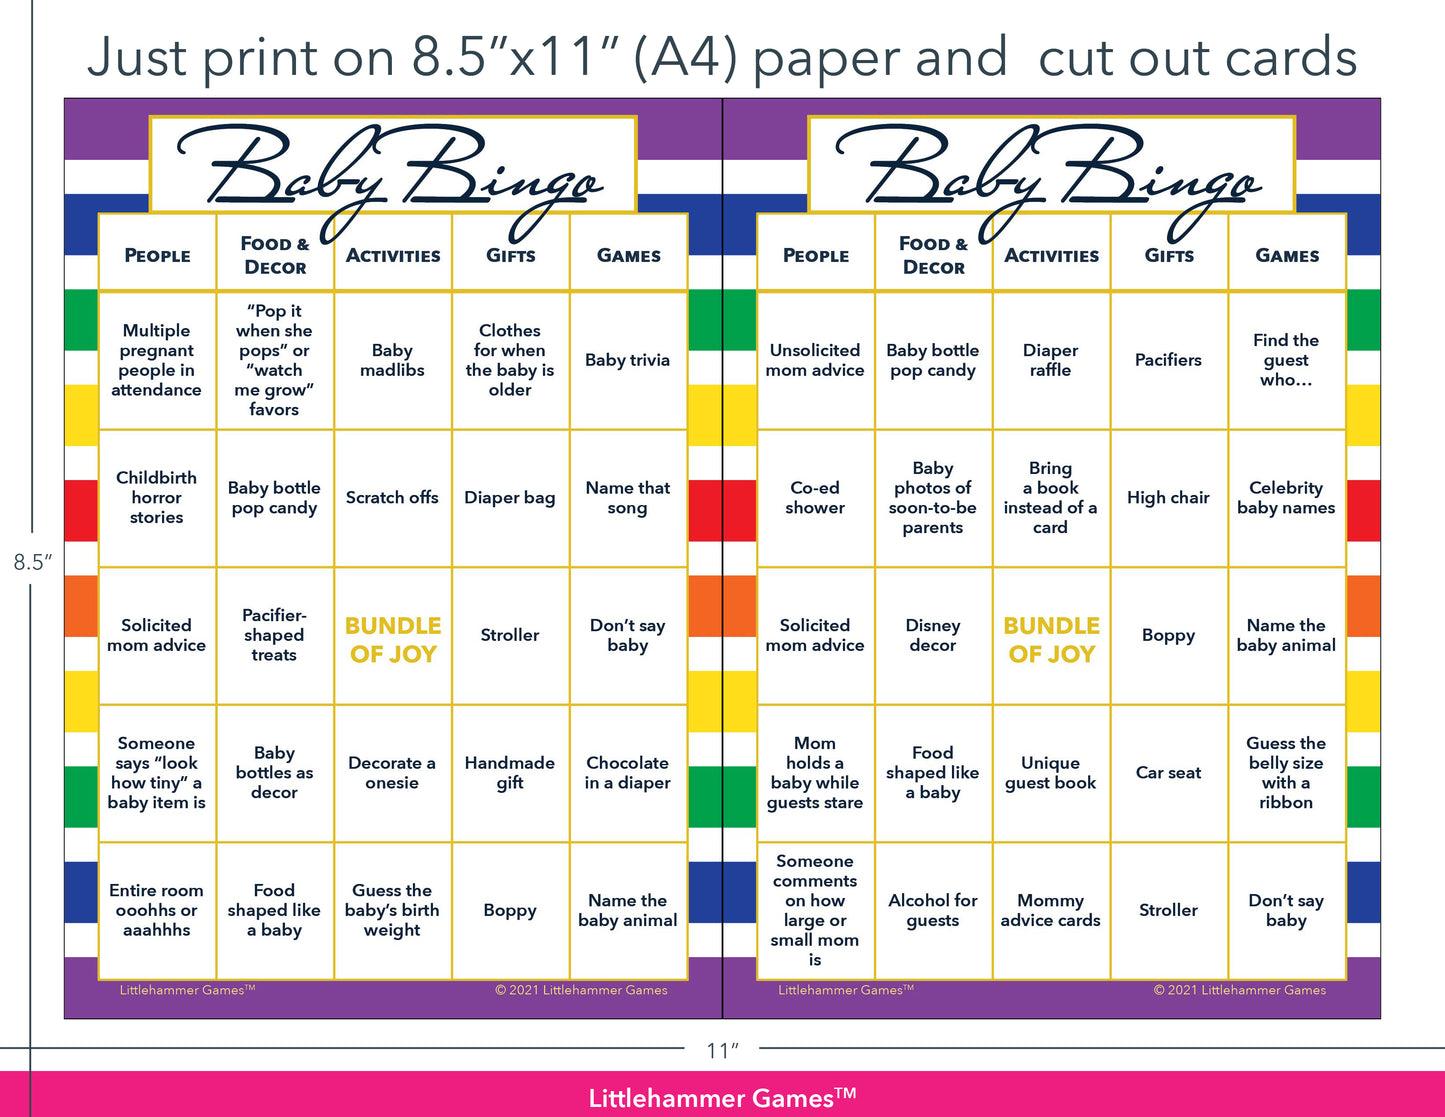 Rainbow-striped Baby Bingo game cards with printing instructions